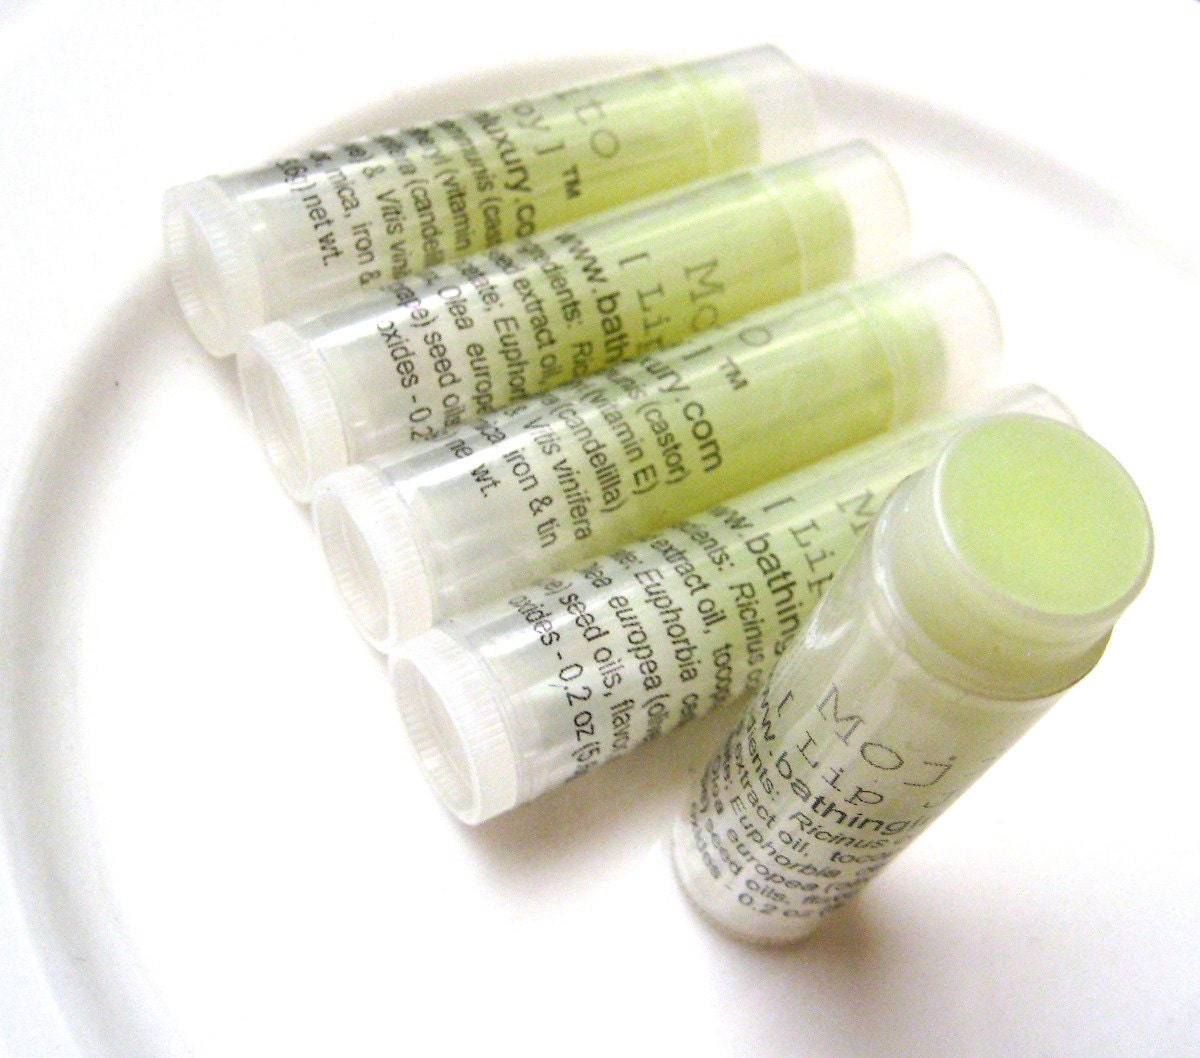 Mojito for Fathers Day - VEGAN lip balm for men  - made from scratch by me